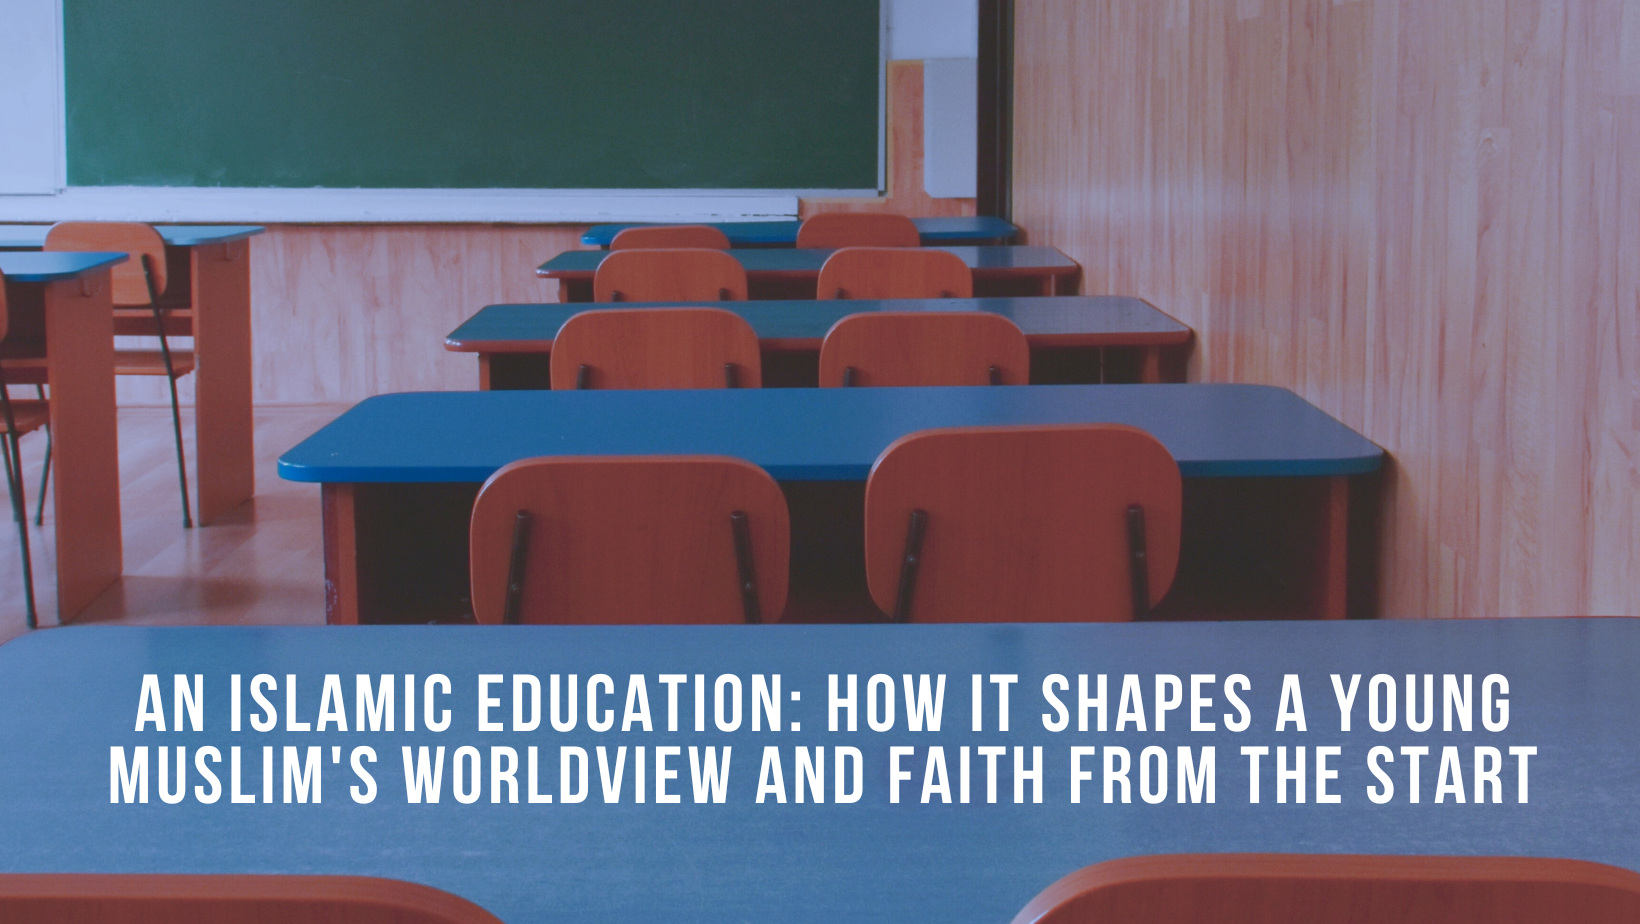 An Islamic education: How it shapes a young Muslim's worldview and faith from the start